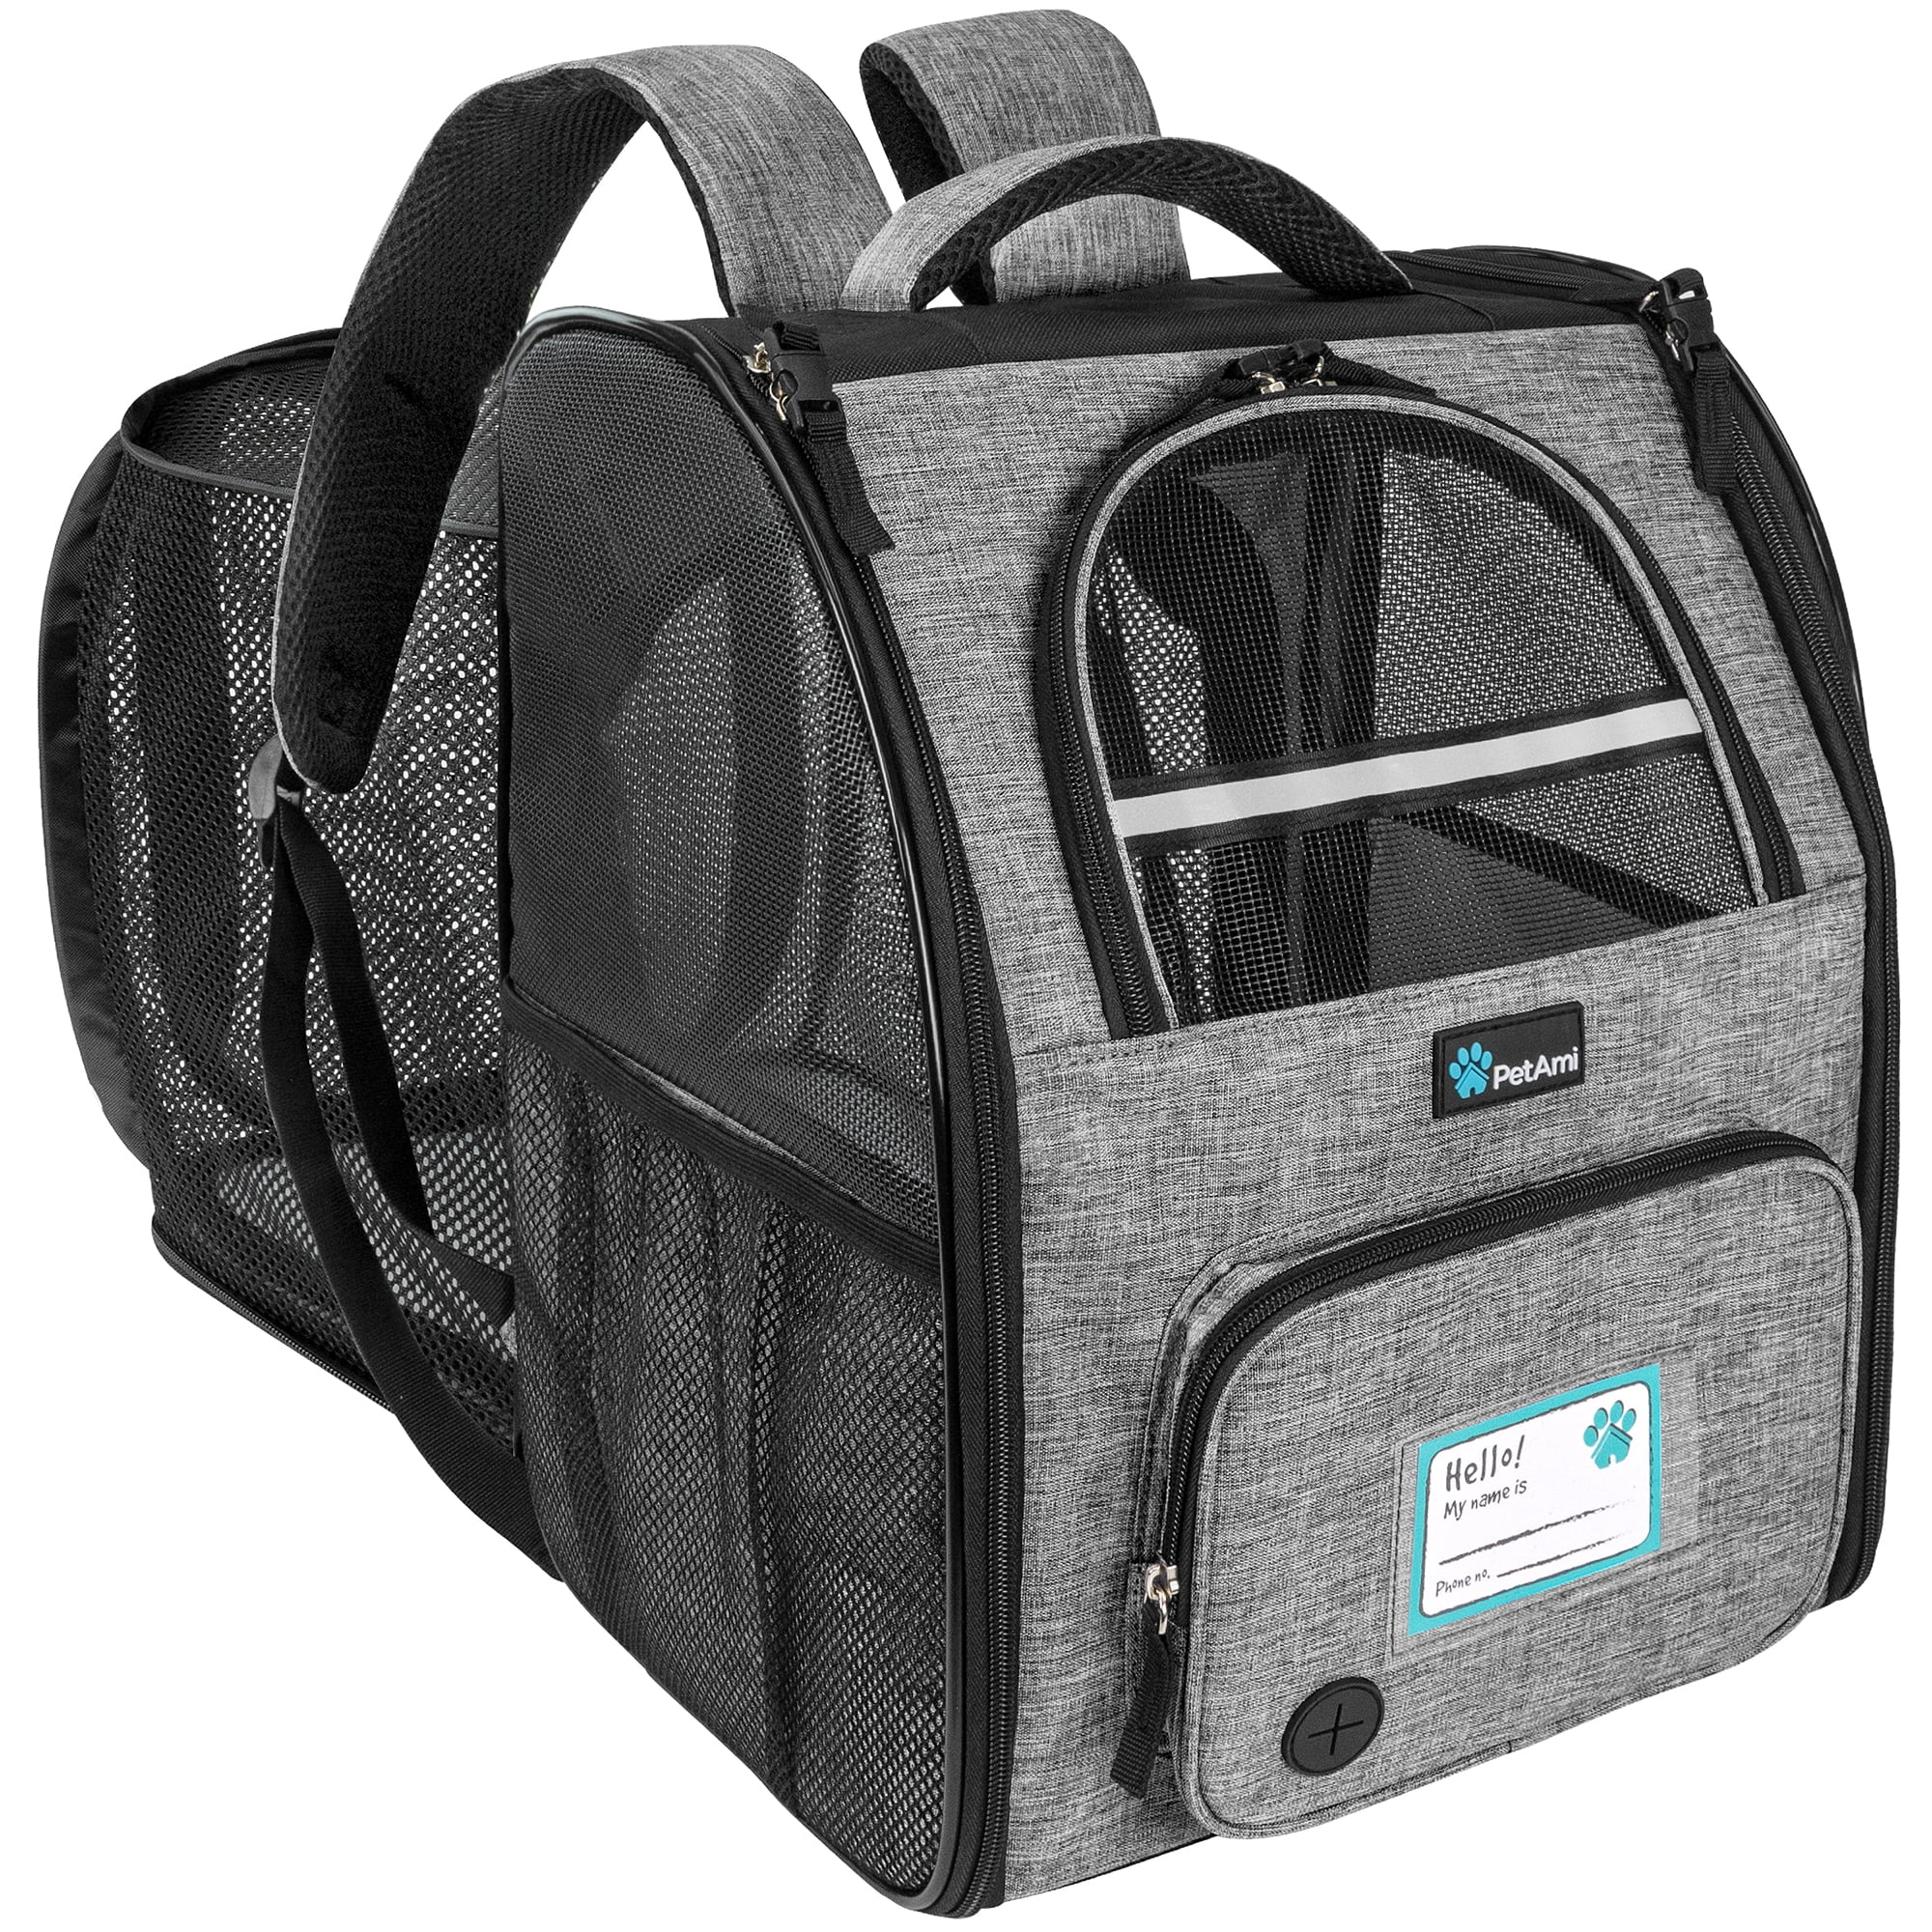 Airline Approved Cat Carrier for Small Dogs,Expandable Pet Carrier